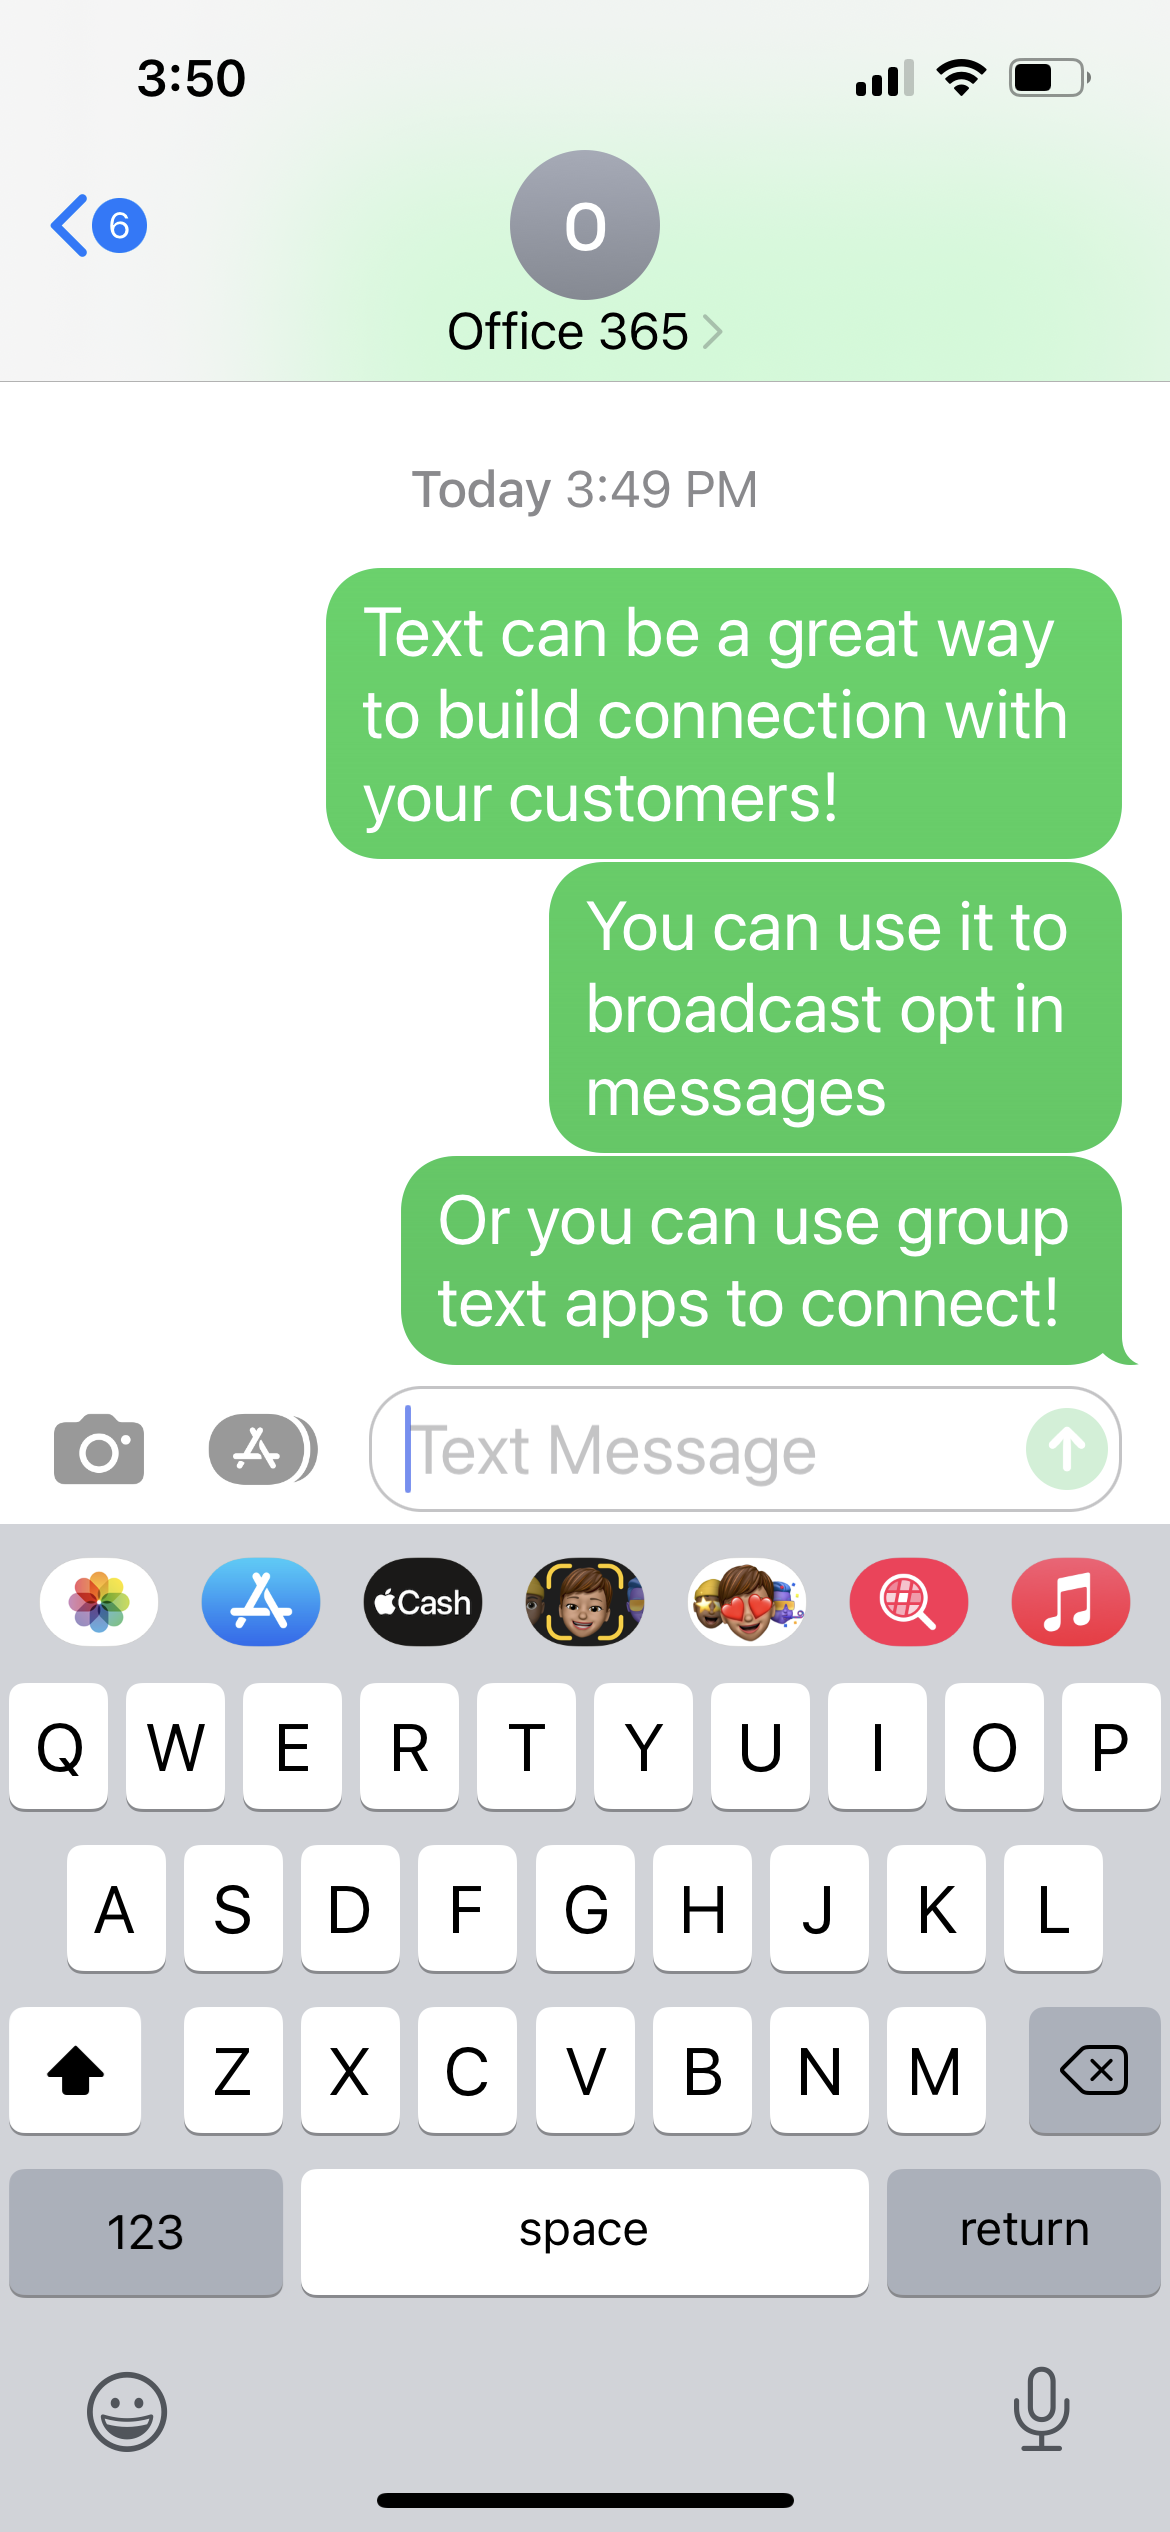 Using text apps for local businesses